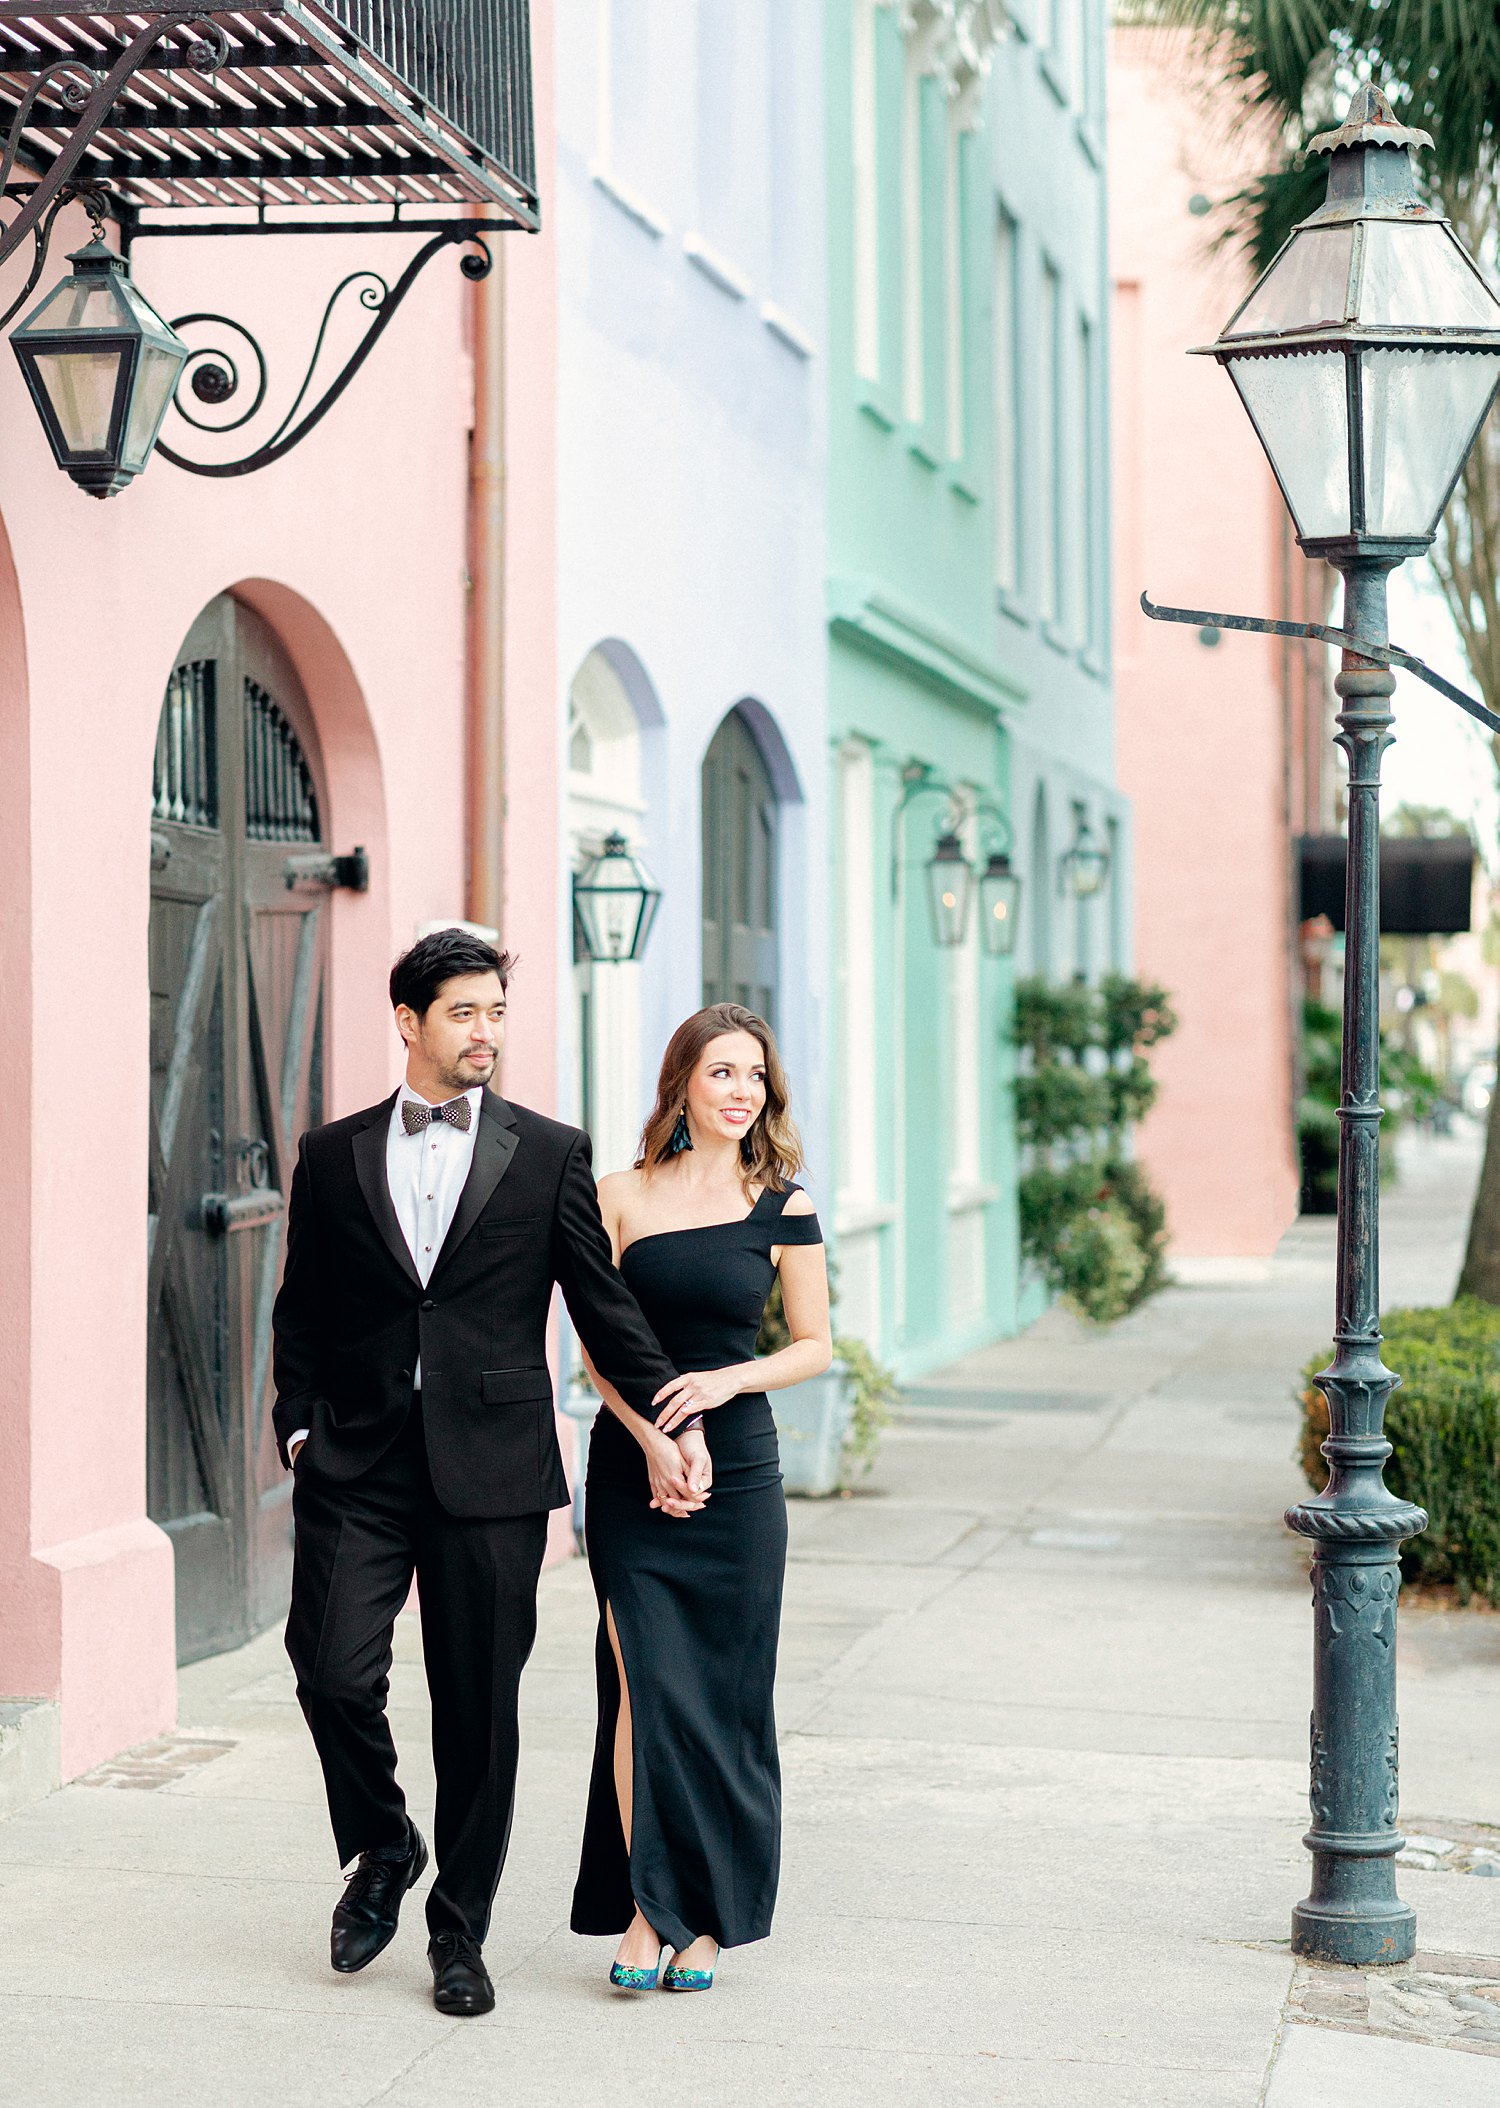 Man in tuxedo and girl in black dress walking by rainbow row homes